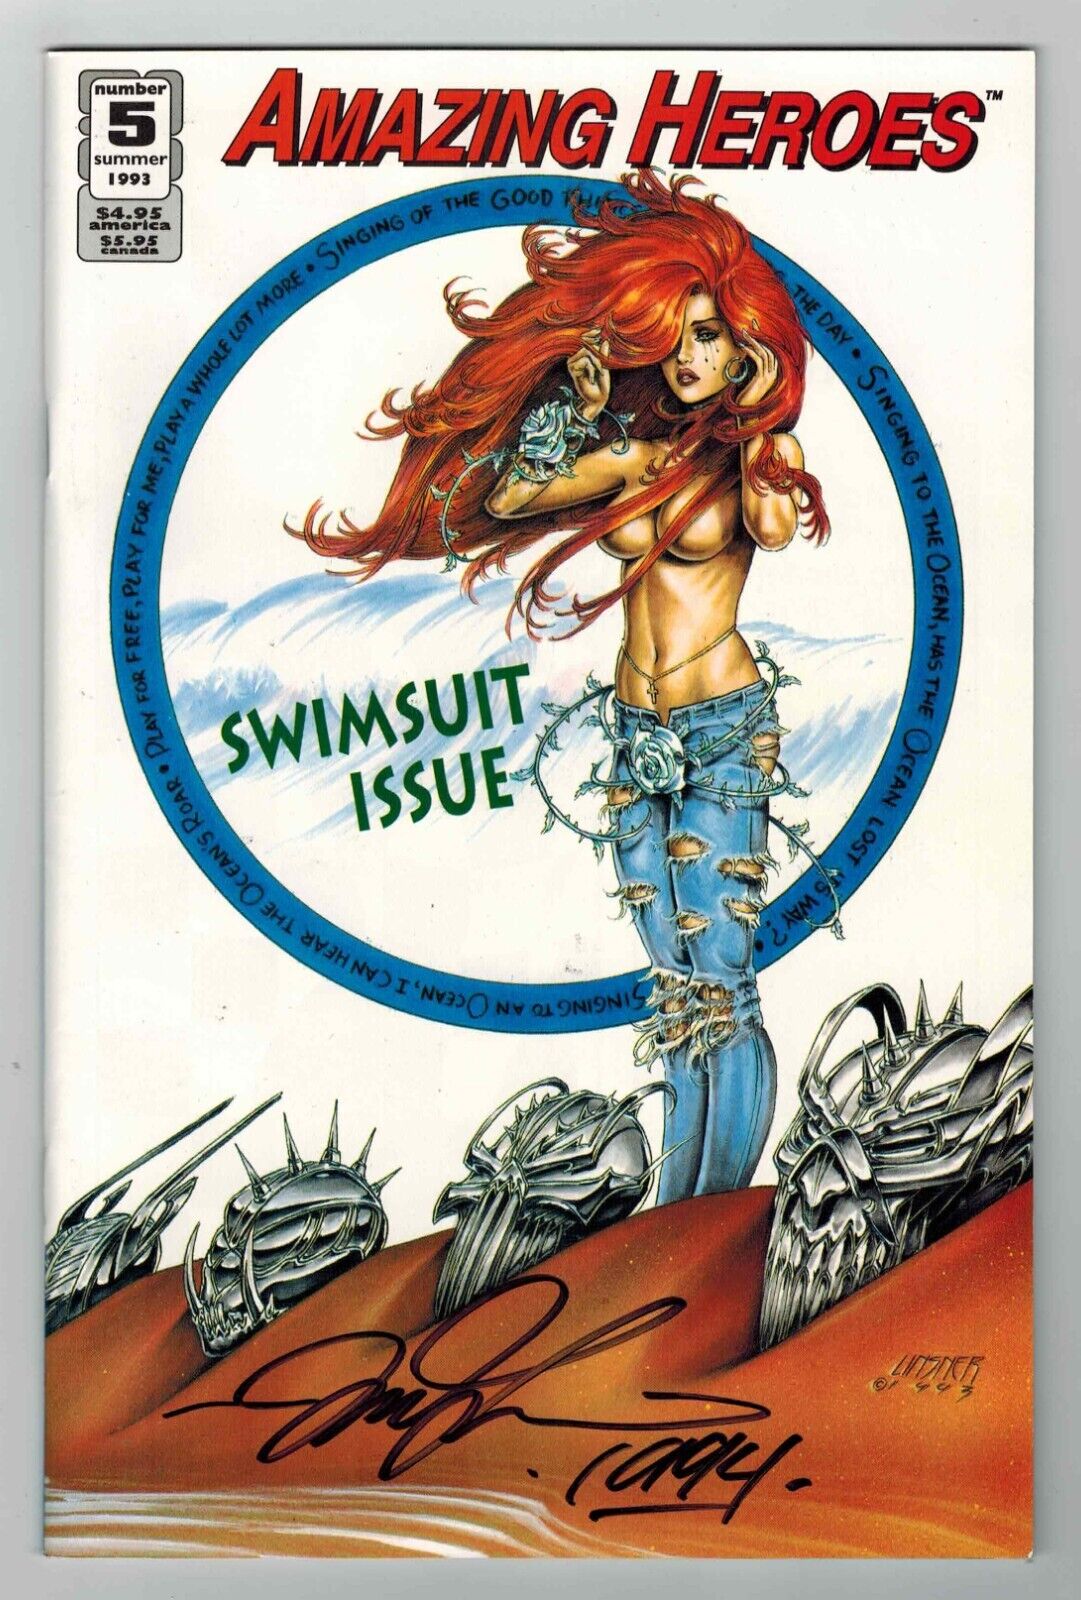 AMAZING HEROES # 5 - SWIMSUIT ISSUE - SIGNED BY JOSEPH MICHAEL LINSNER - NM